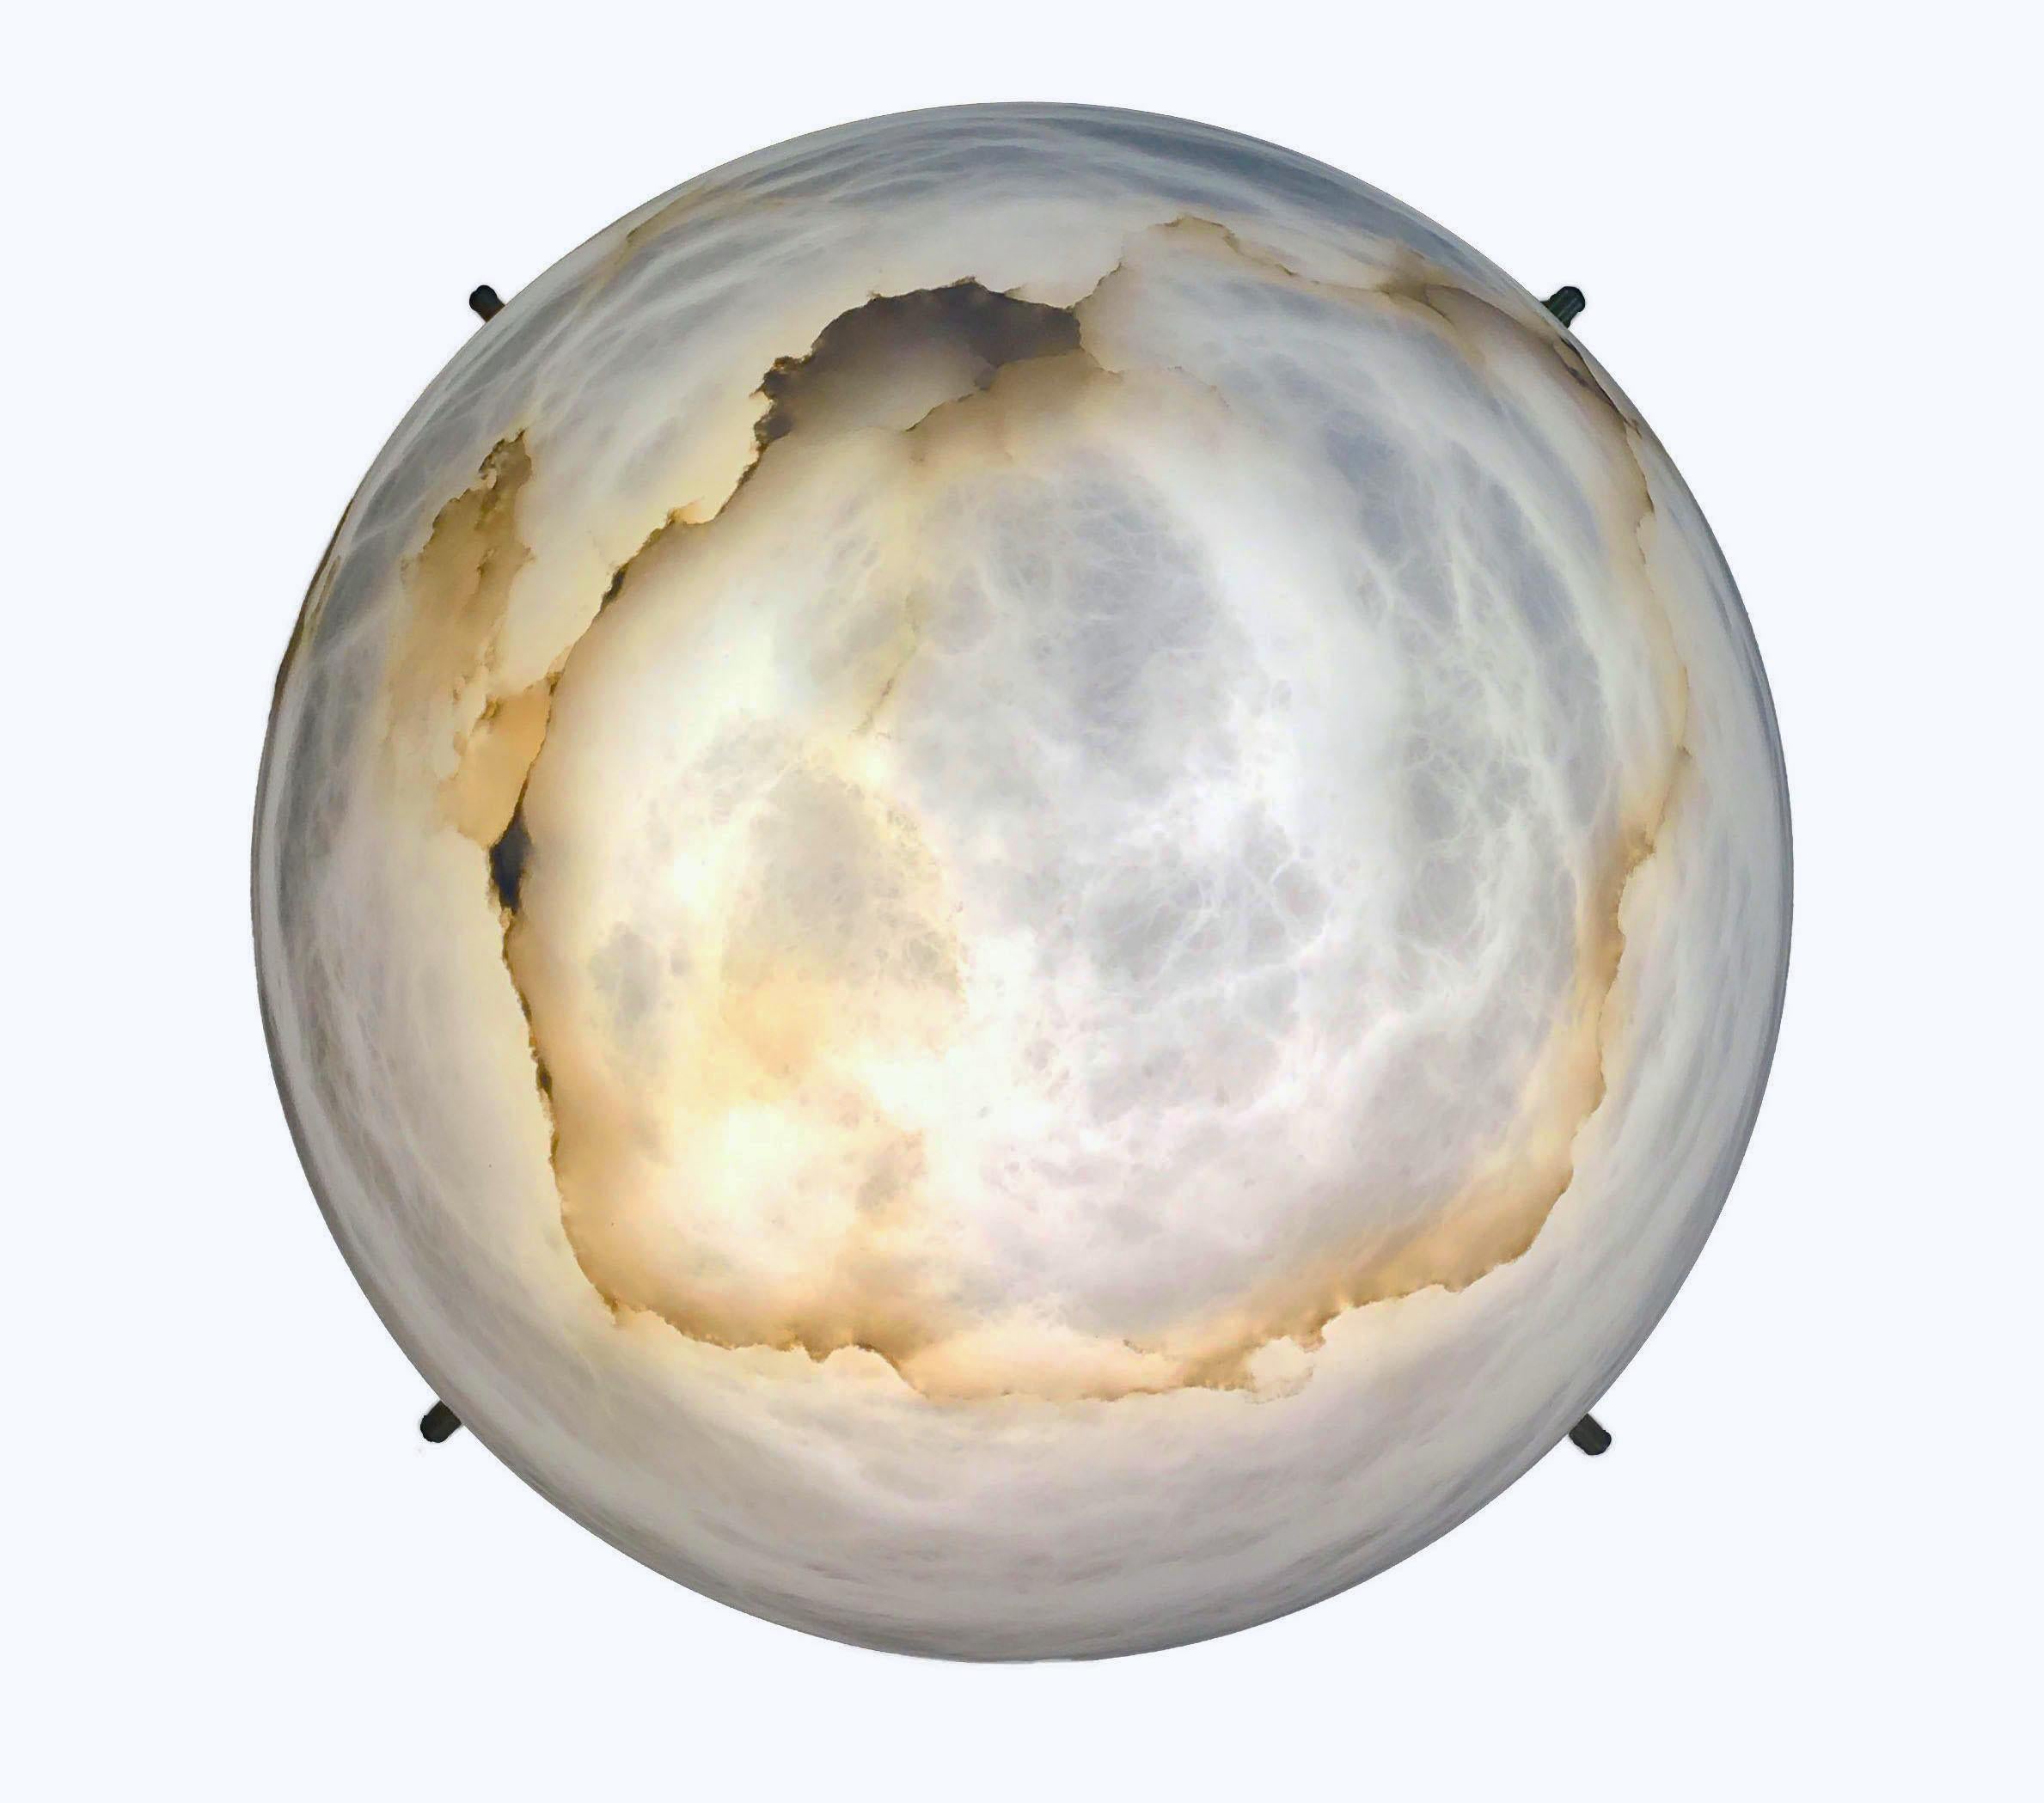 Large 'moon 4' alabaster wall or ceiling lamp in the manner of Pierre Chareau. Handcrafted in Los Angeles in the workshop of noted French designer and antiques dealer Denis de le Mesiere, who meticulously pays homage to the work of Pierre Chareau